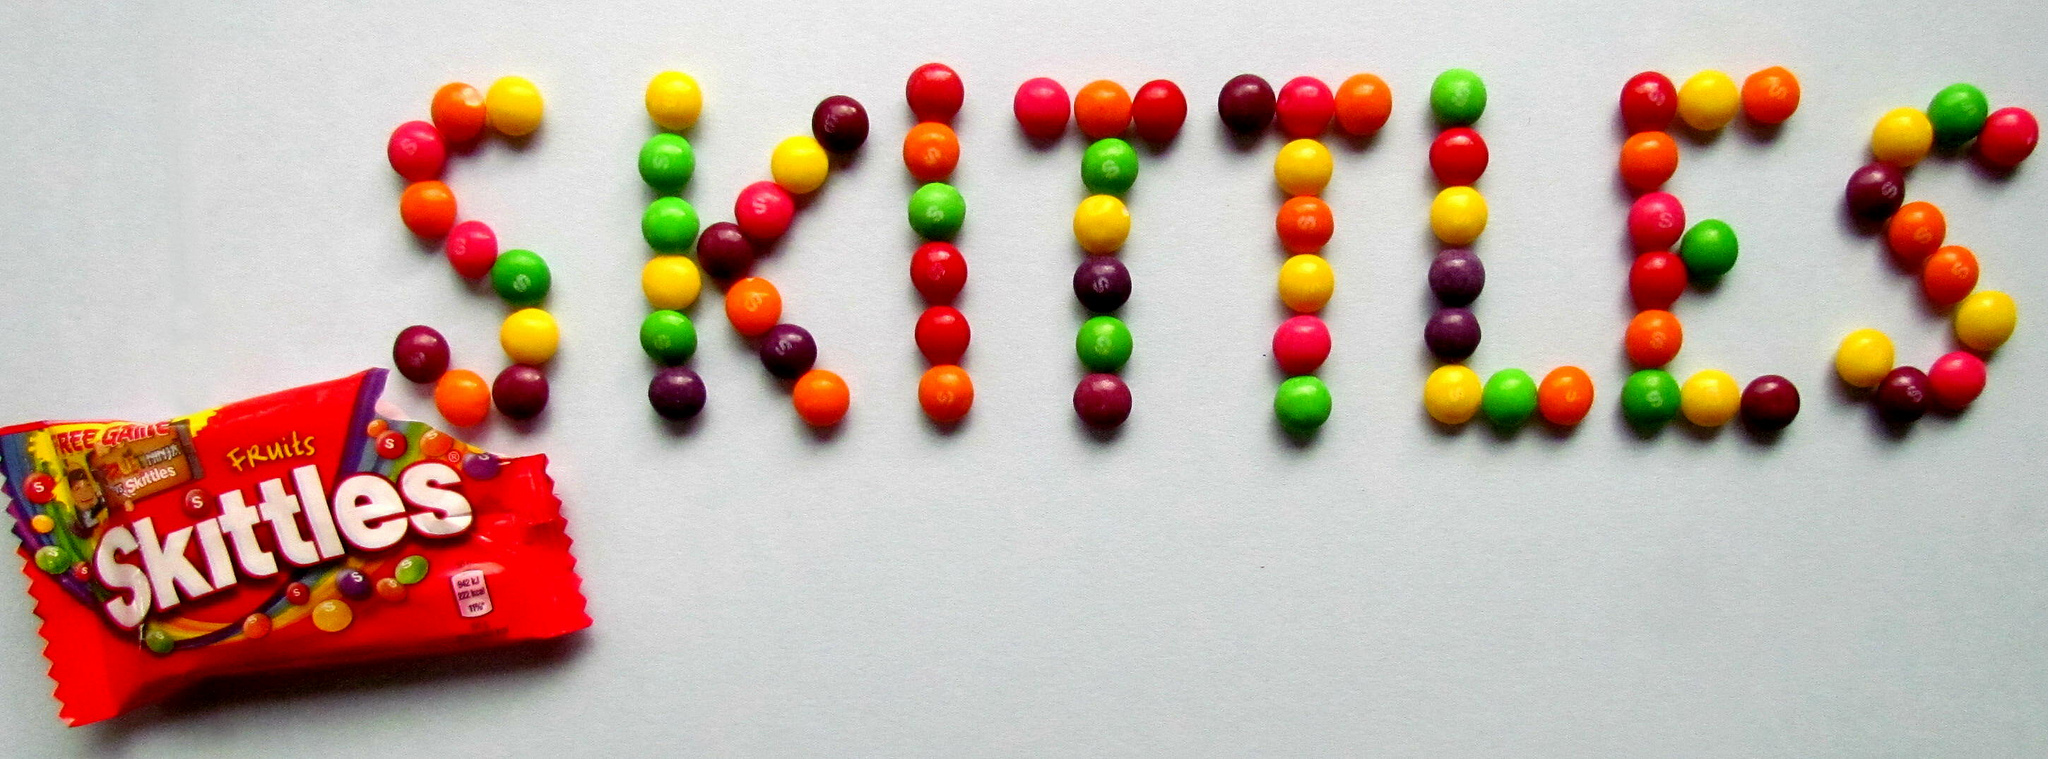 Naked girls and skittles — pic 13